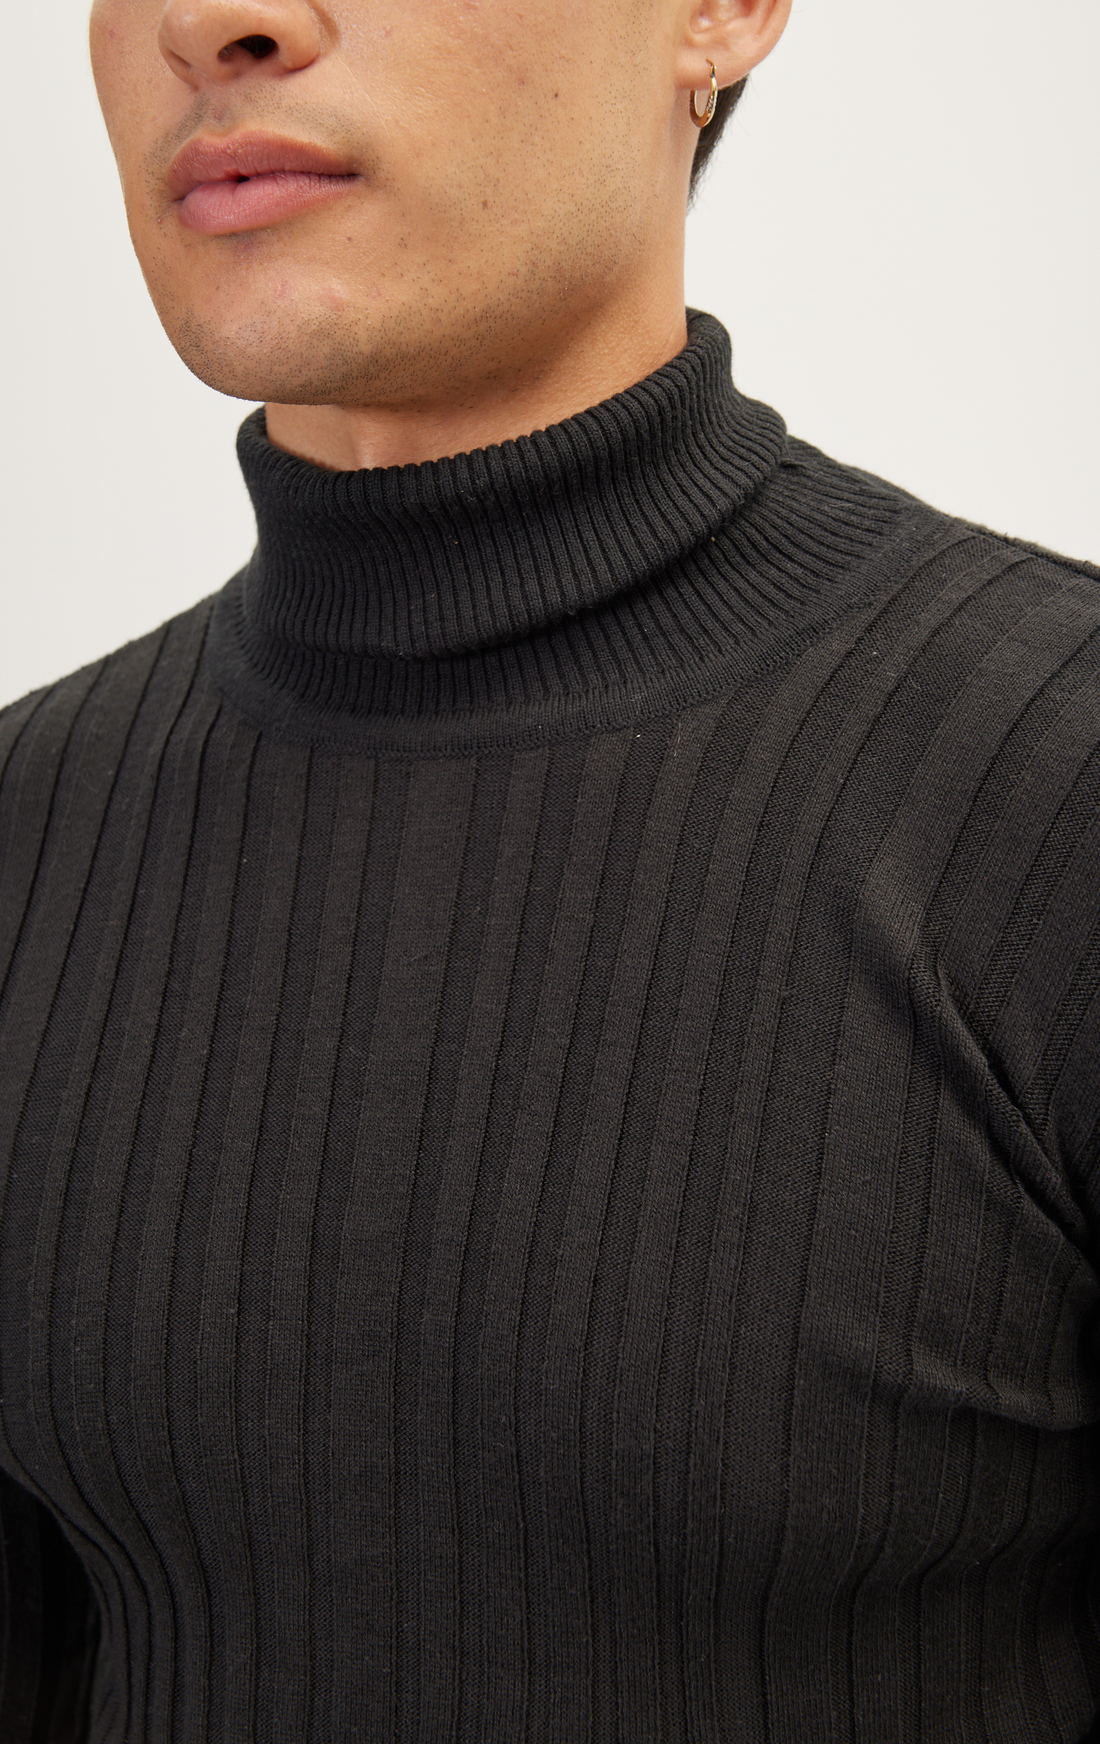 N° 6175 RT ROLL NECK RIBBED SWEATER - BLACK